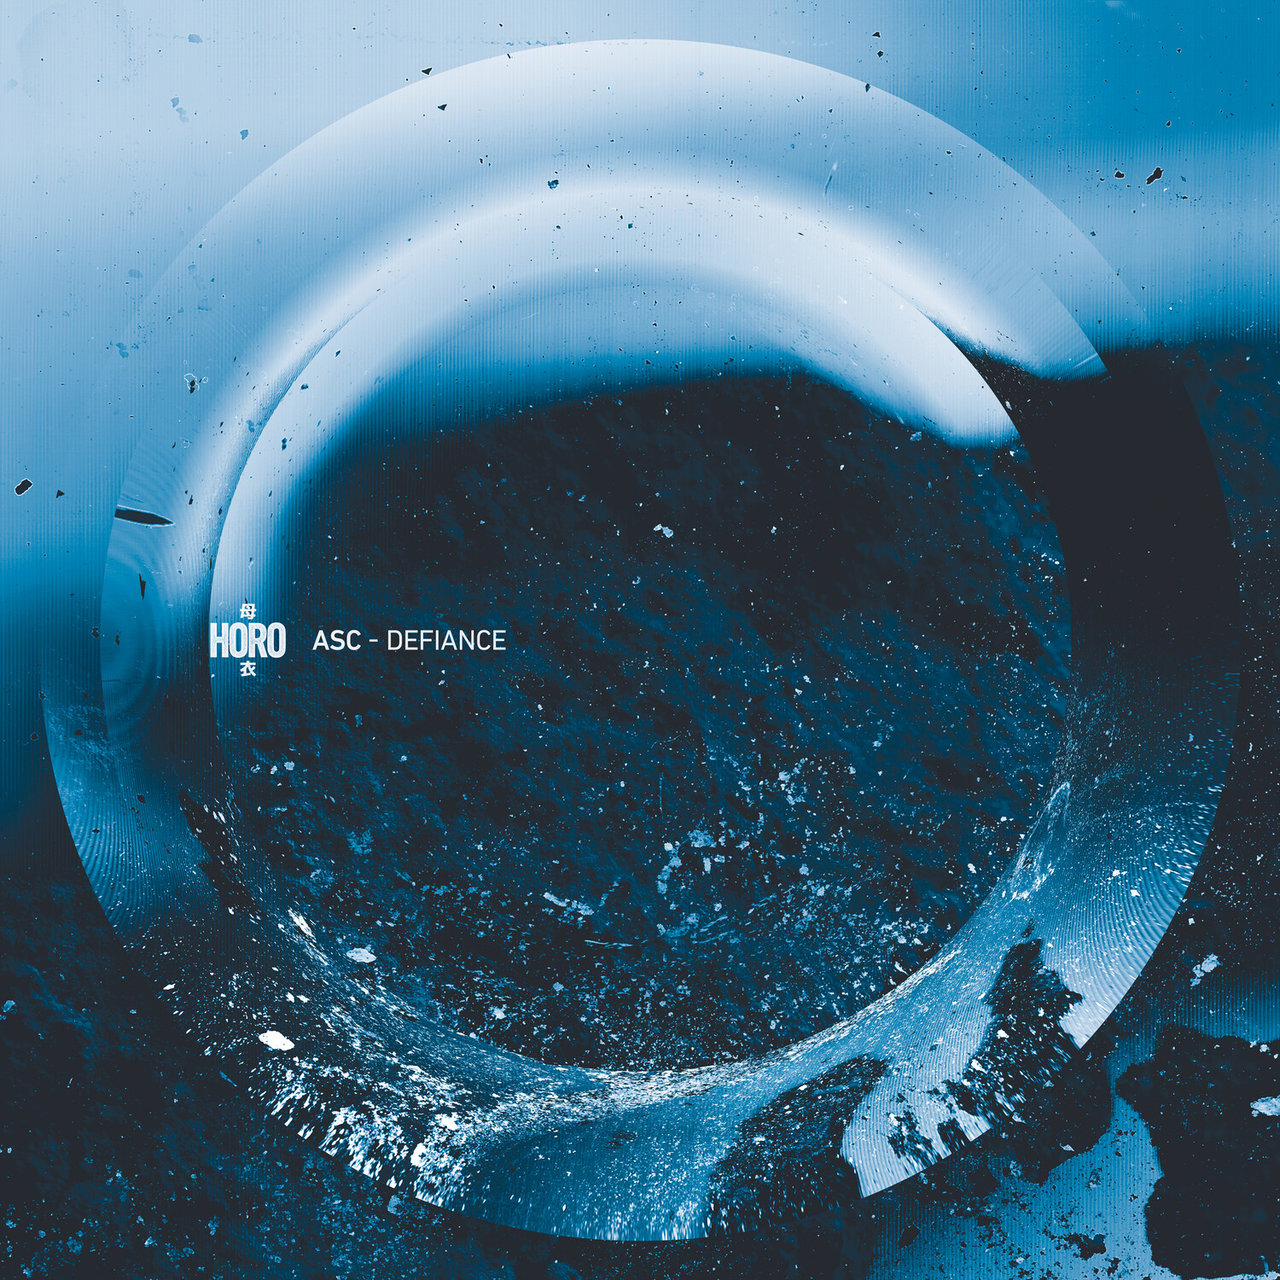 image cover: ASC - Defiance / Horo